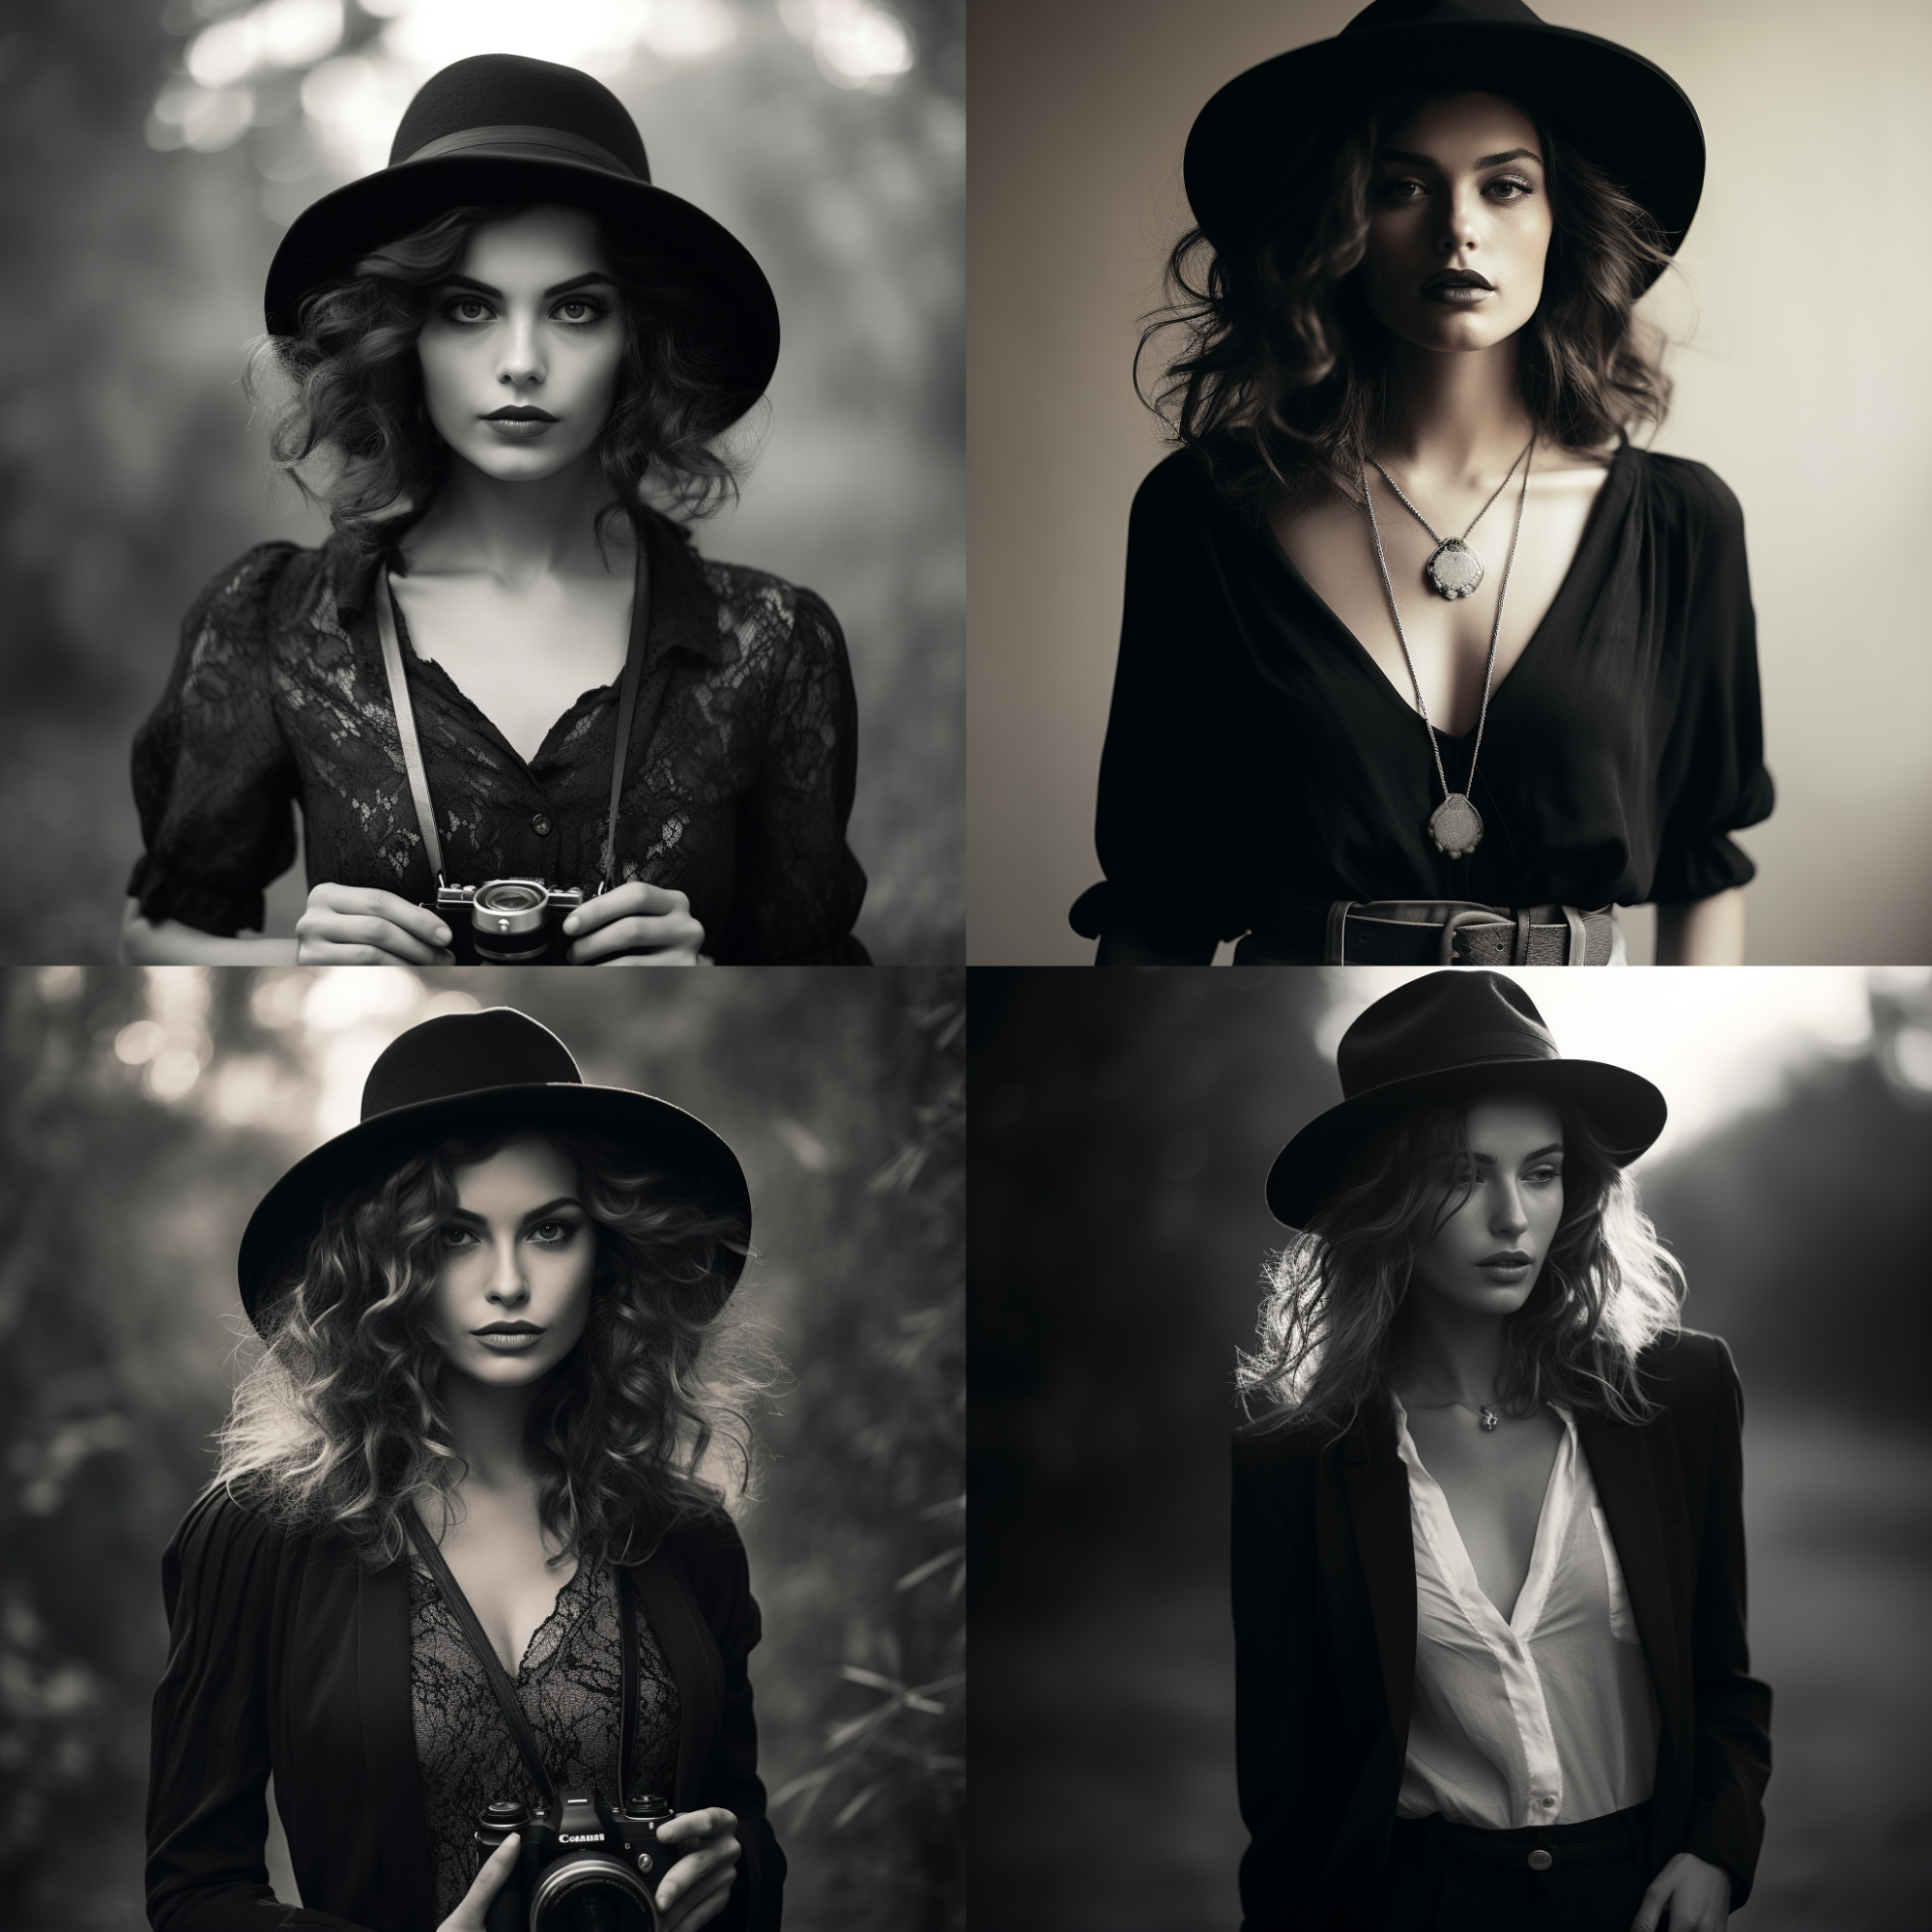 Four image options generated by Midjourney based on a fashion frontier prompt